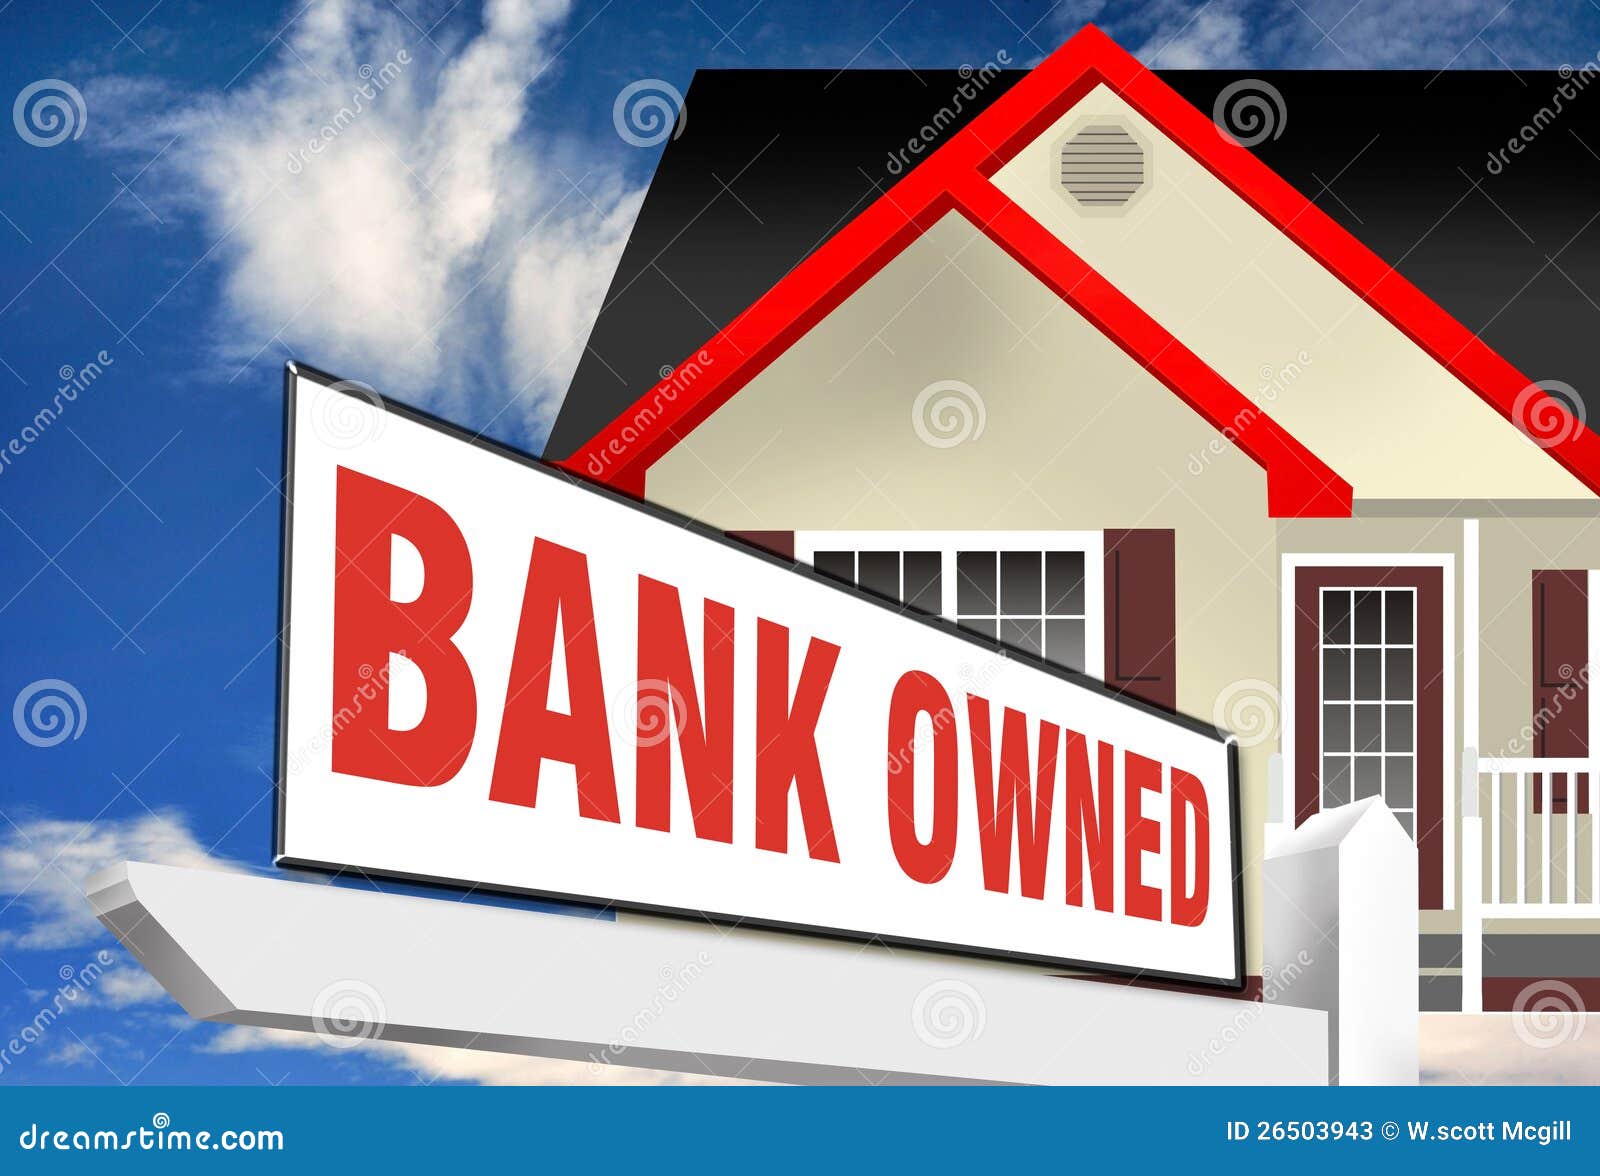 bank owned property